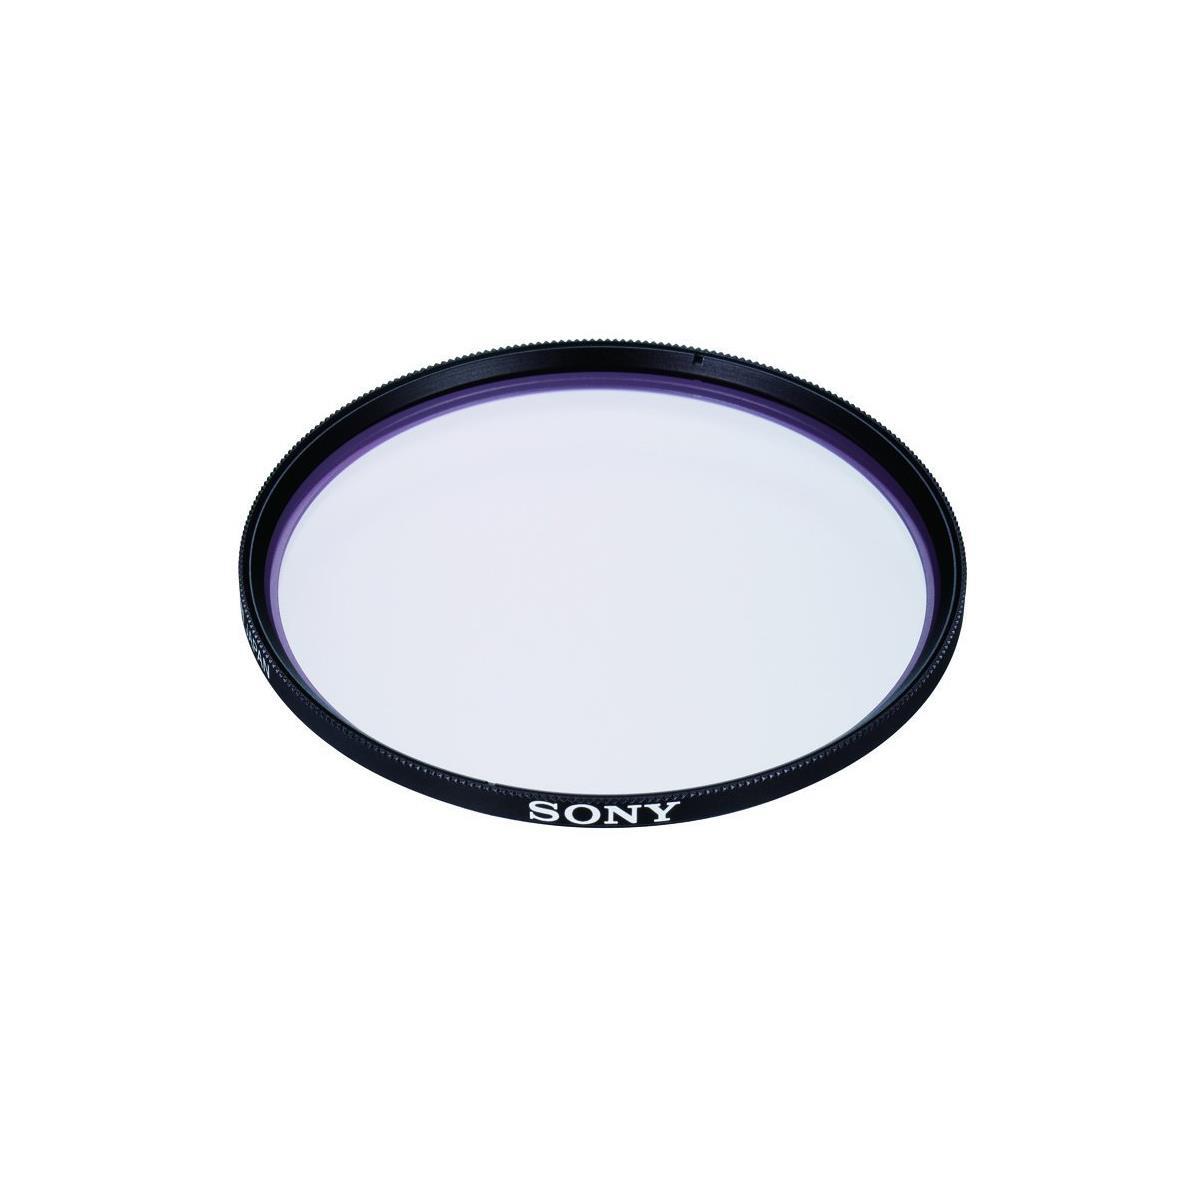 Sony 49mm (MC) Multi-Coated Clear Lens Protecting Filter